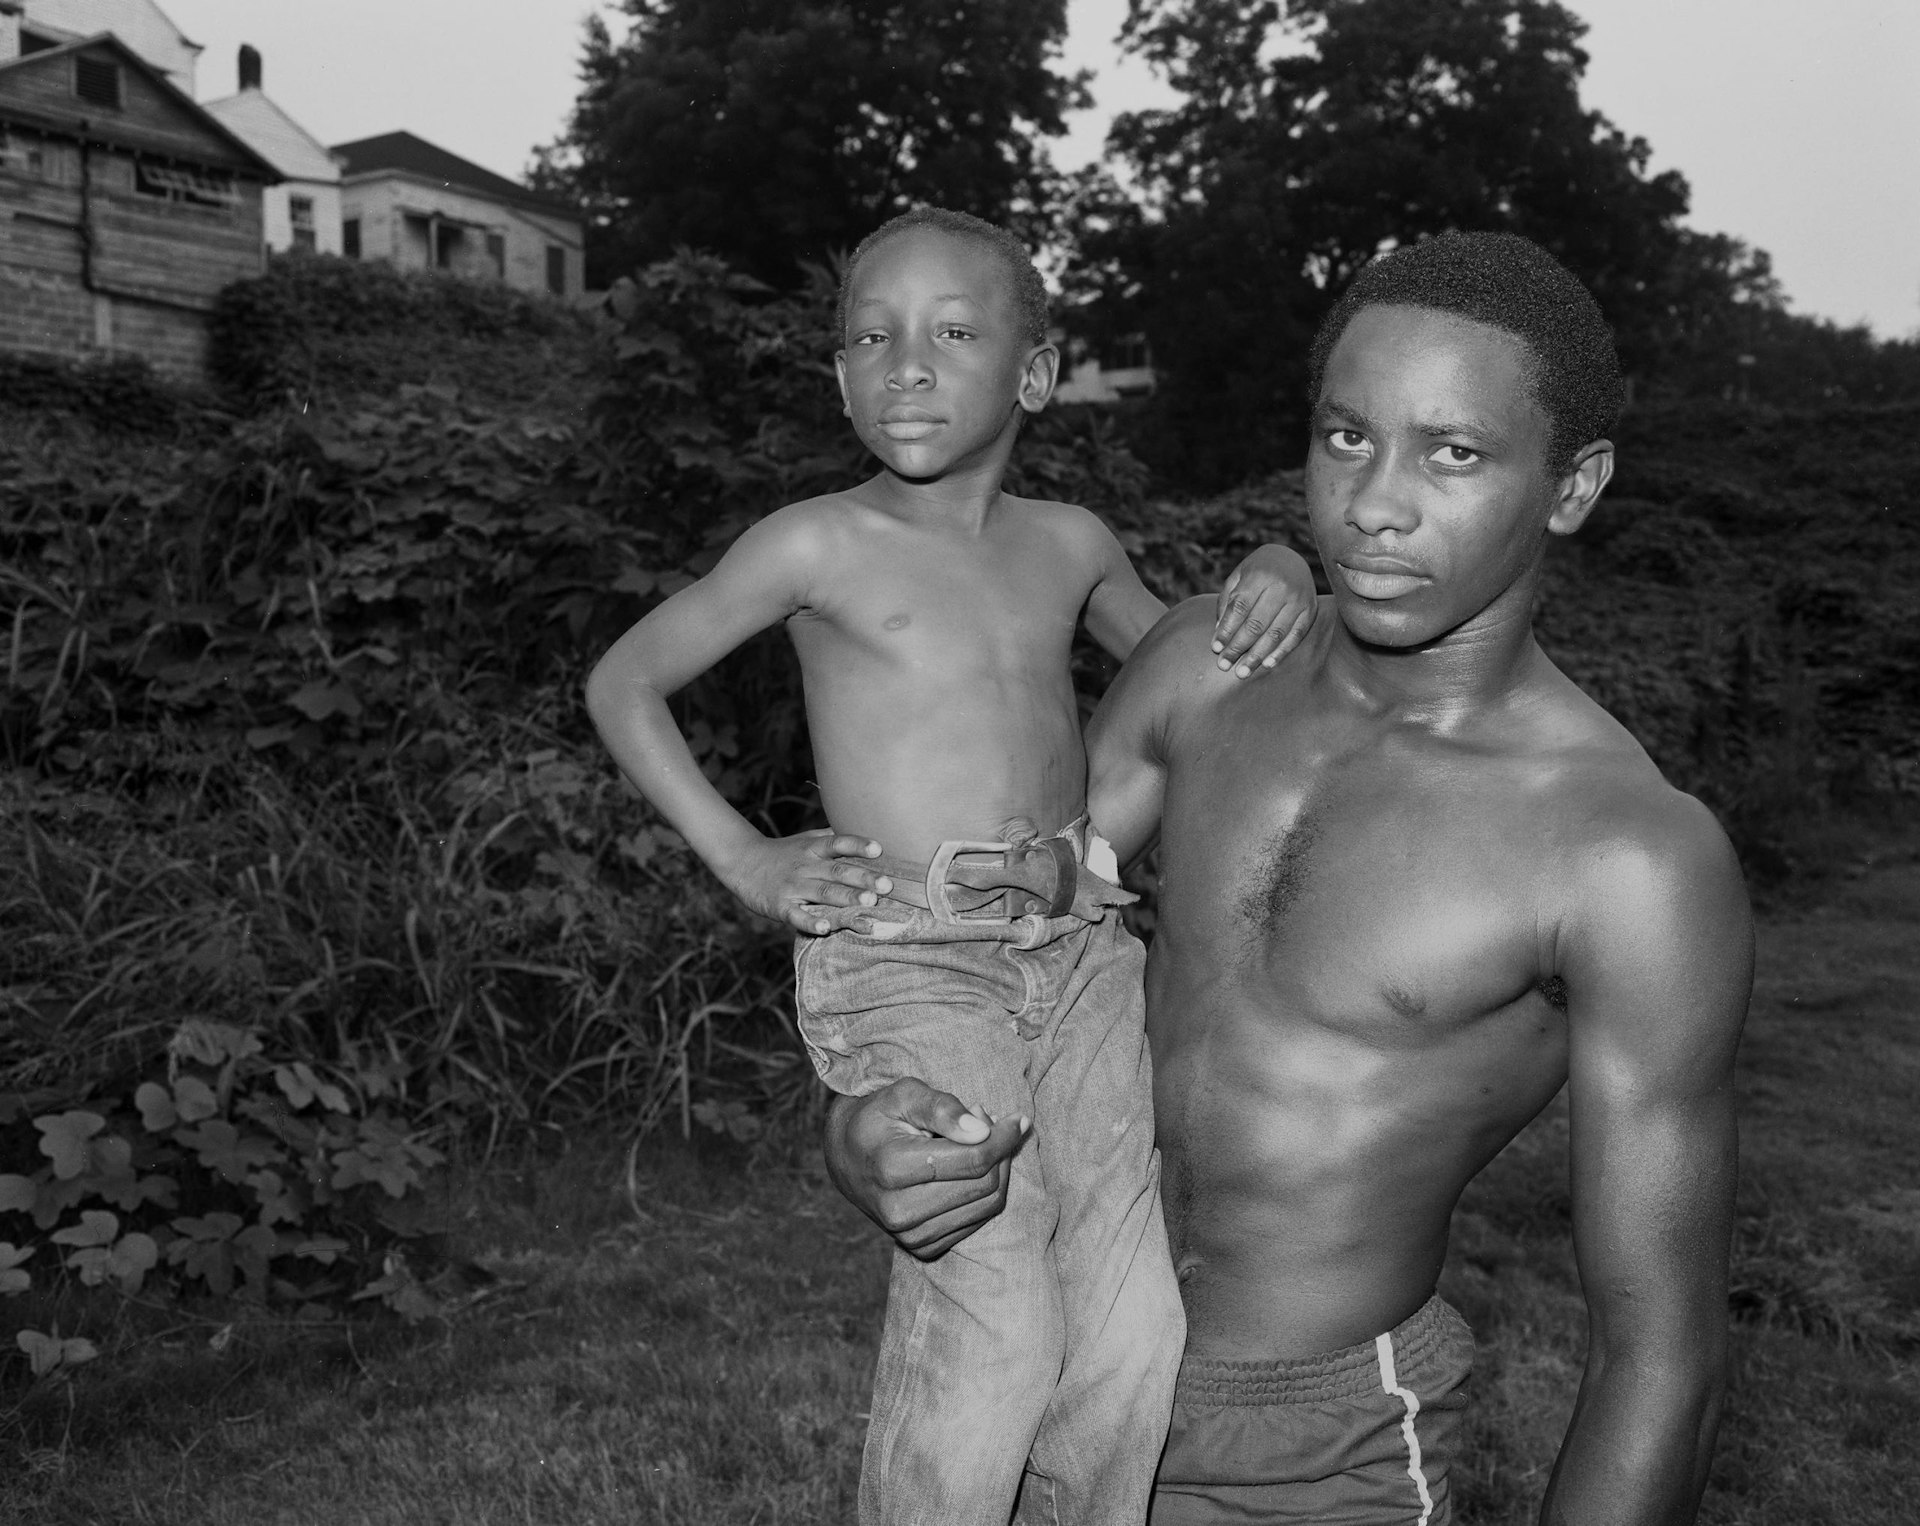 A powerful portrait of Black American life in the South